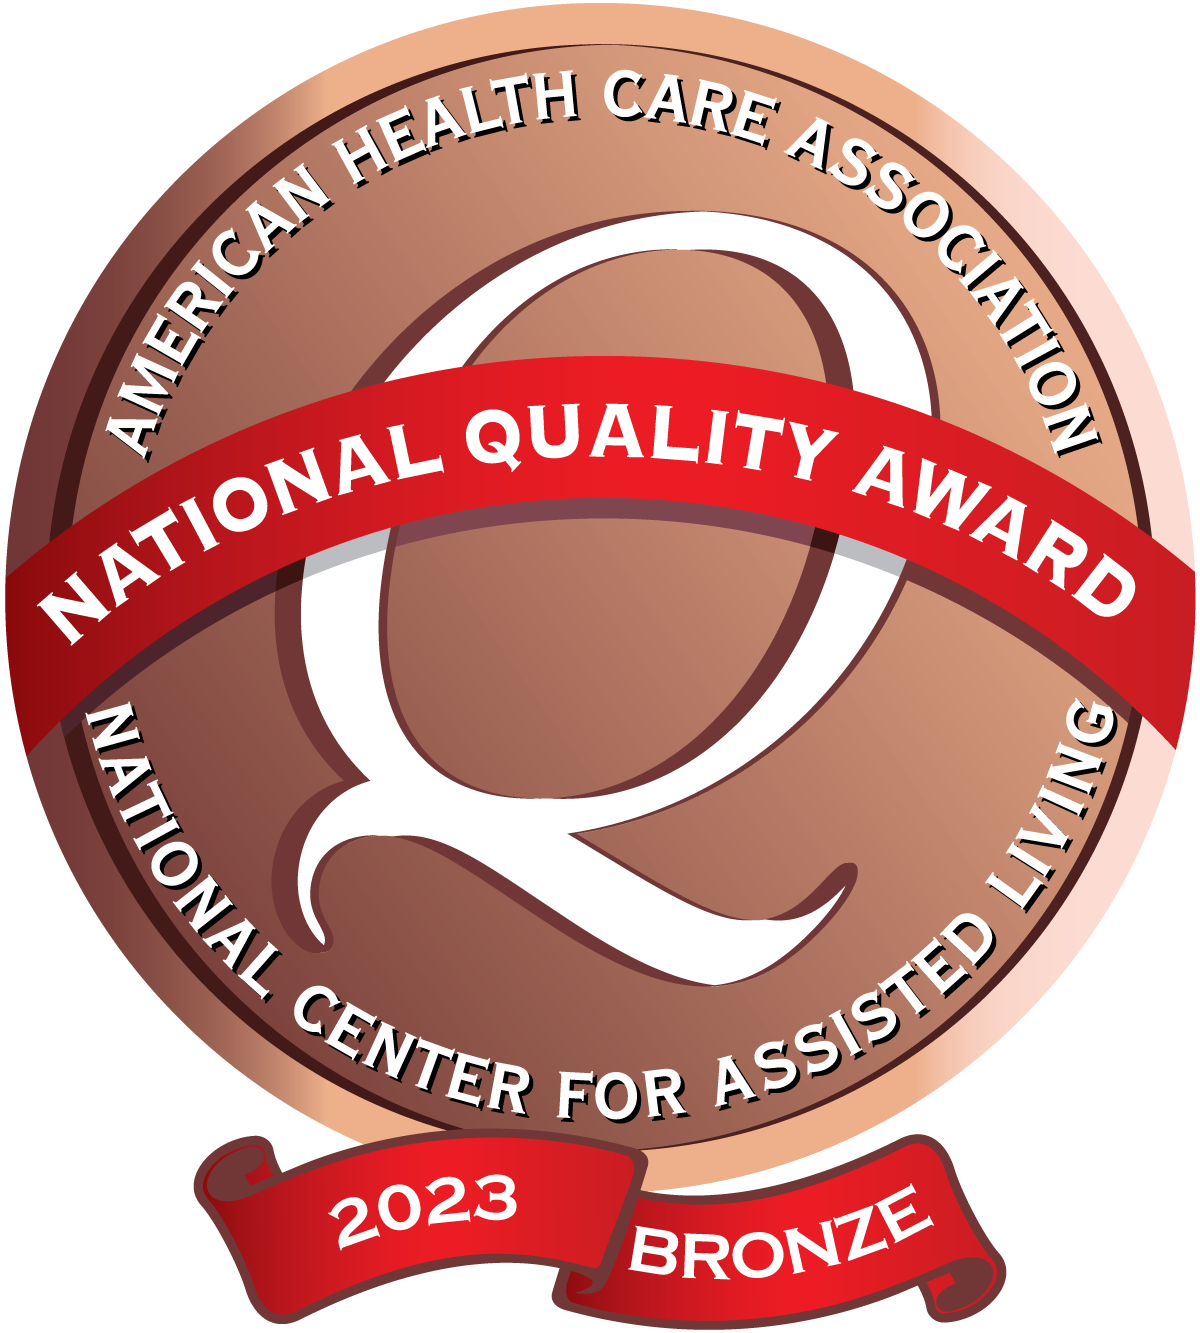 Six North Shore Centers Earn AHCA/NCAL Bronze National Quality Awards